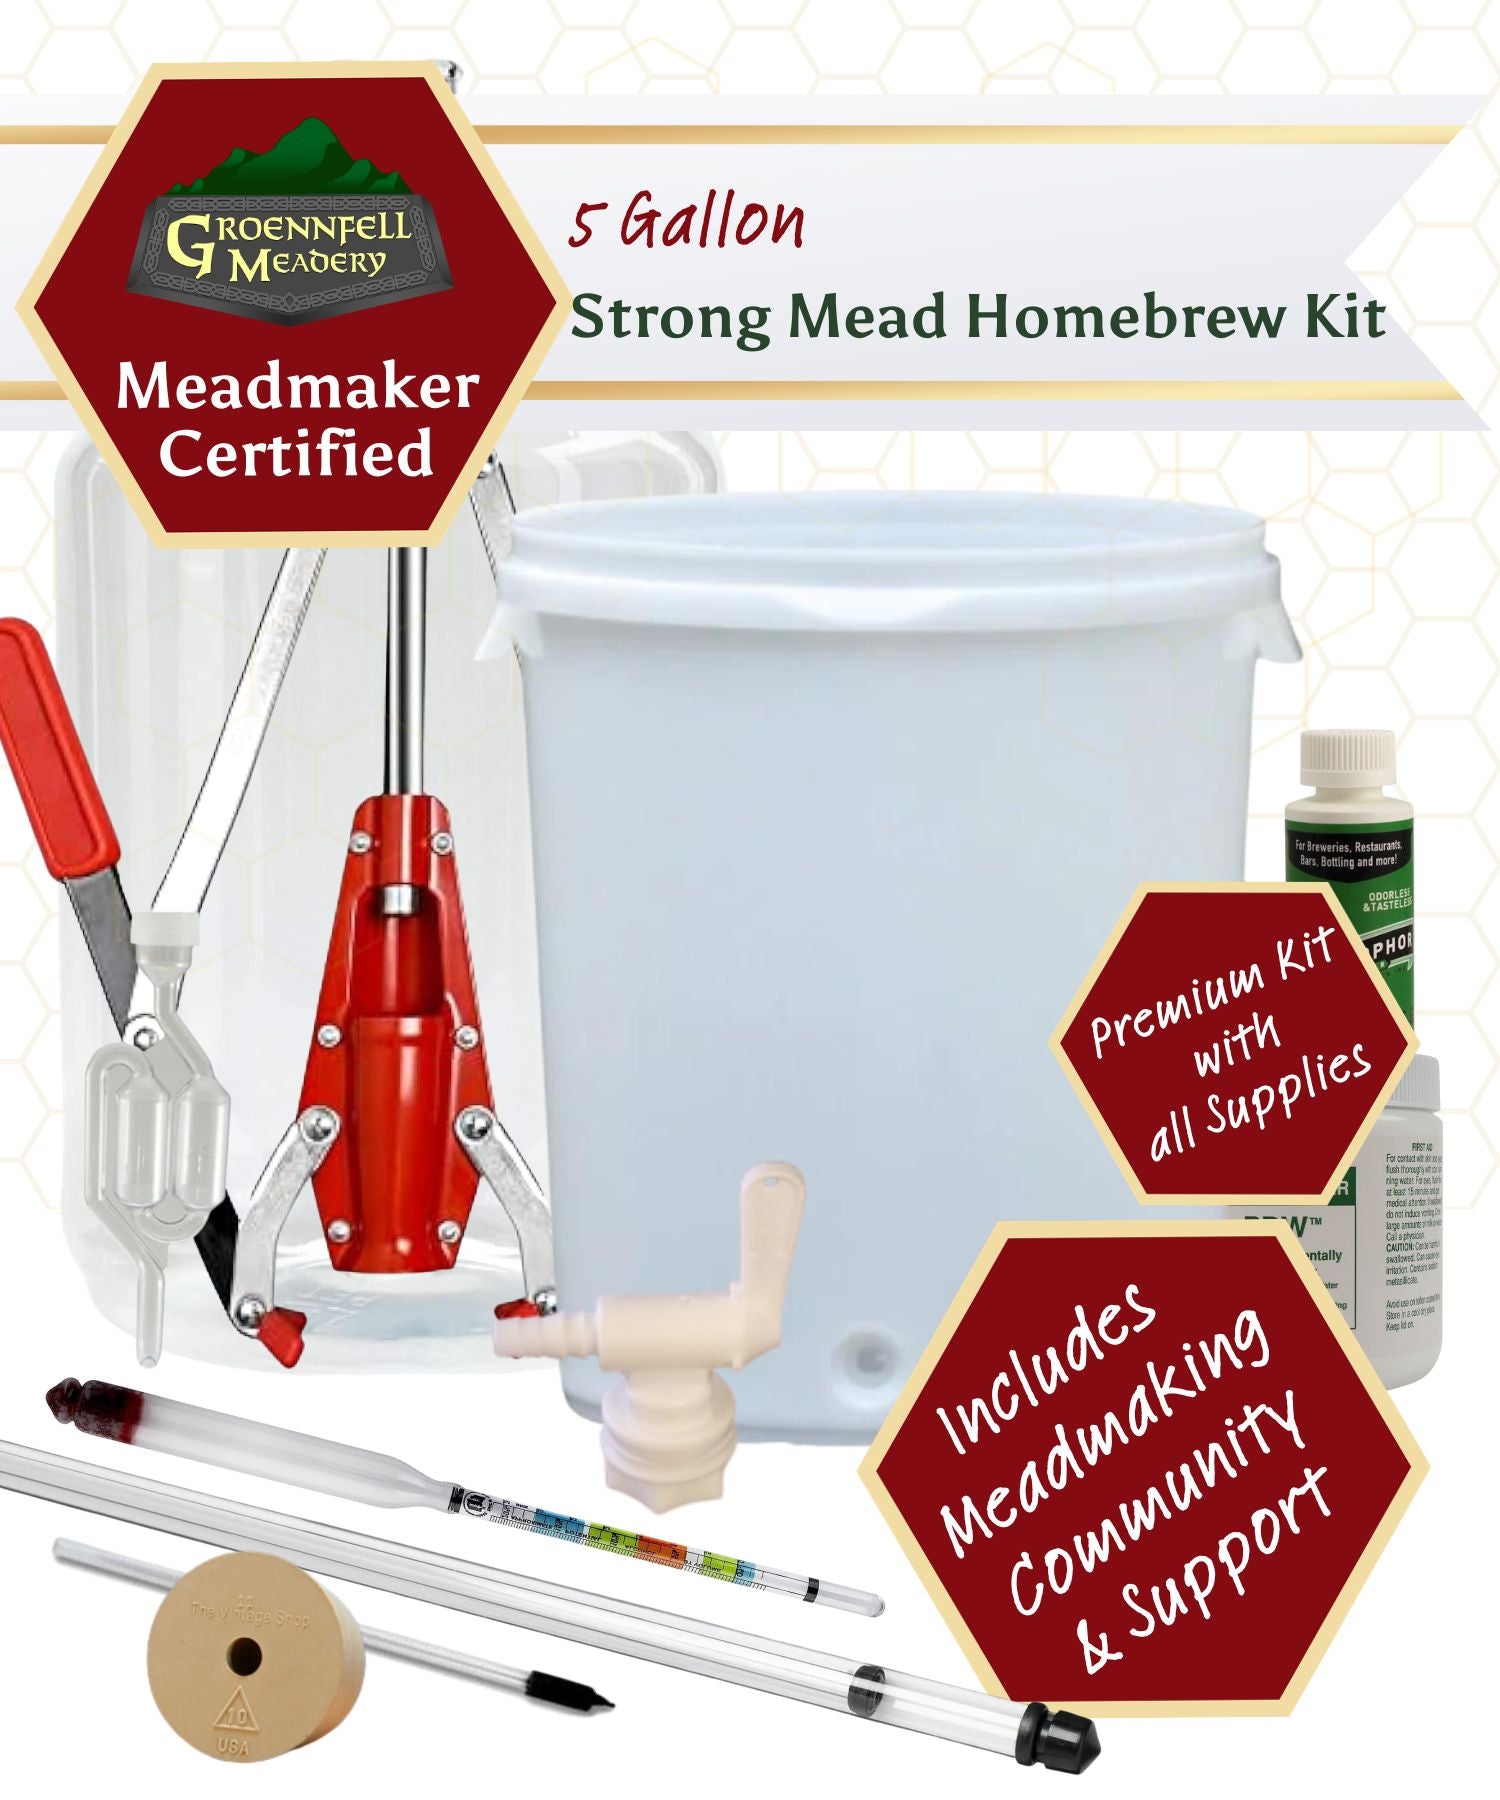 Five Gallon 'Supreme' Homebrew Equipment Kit for Strong Mead